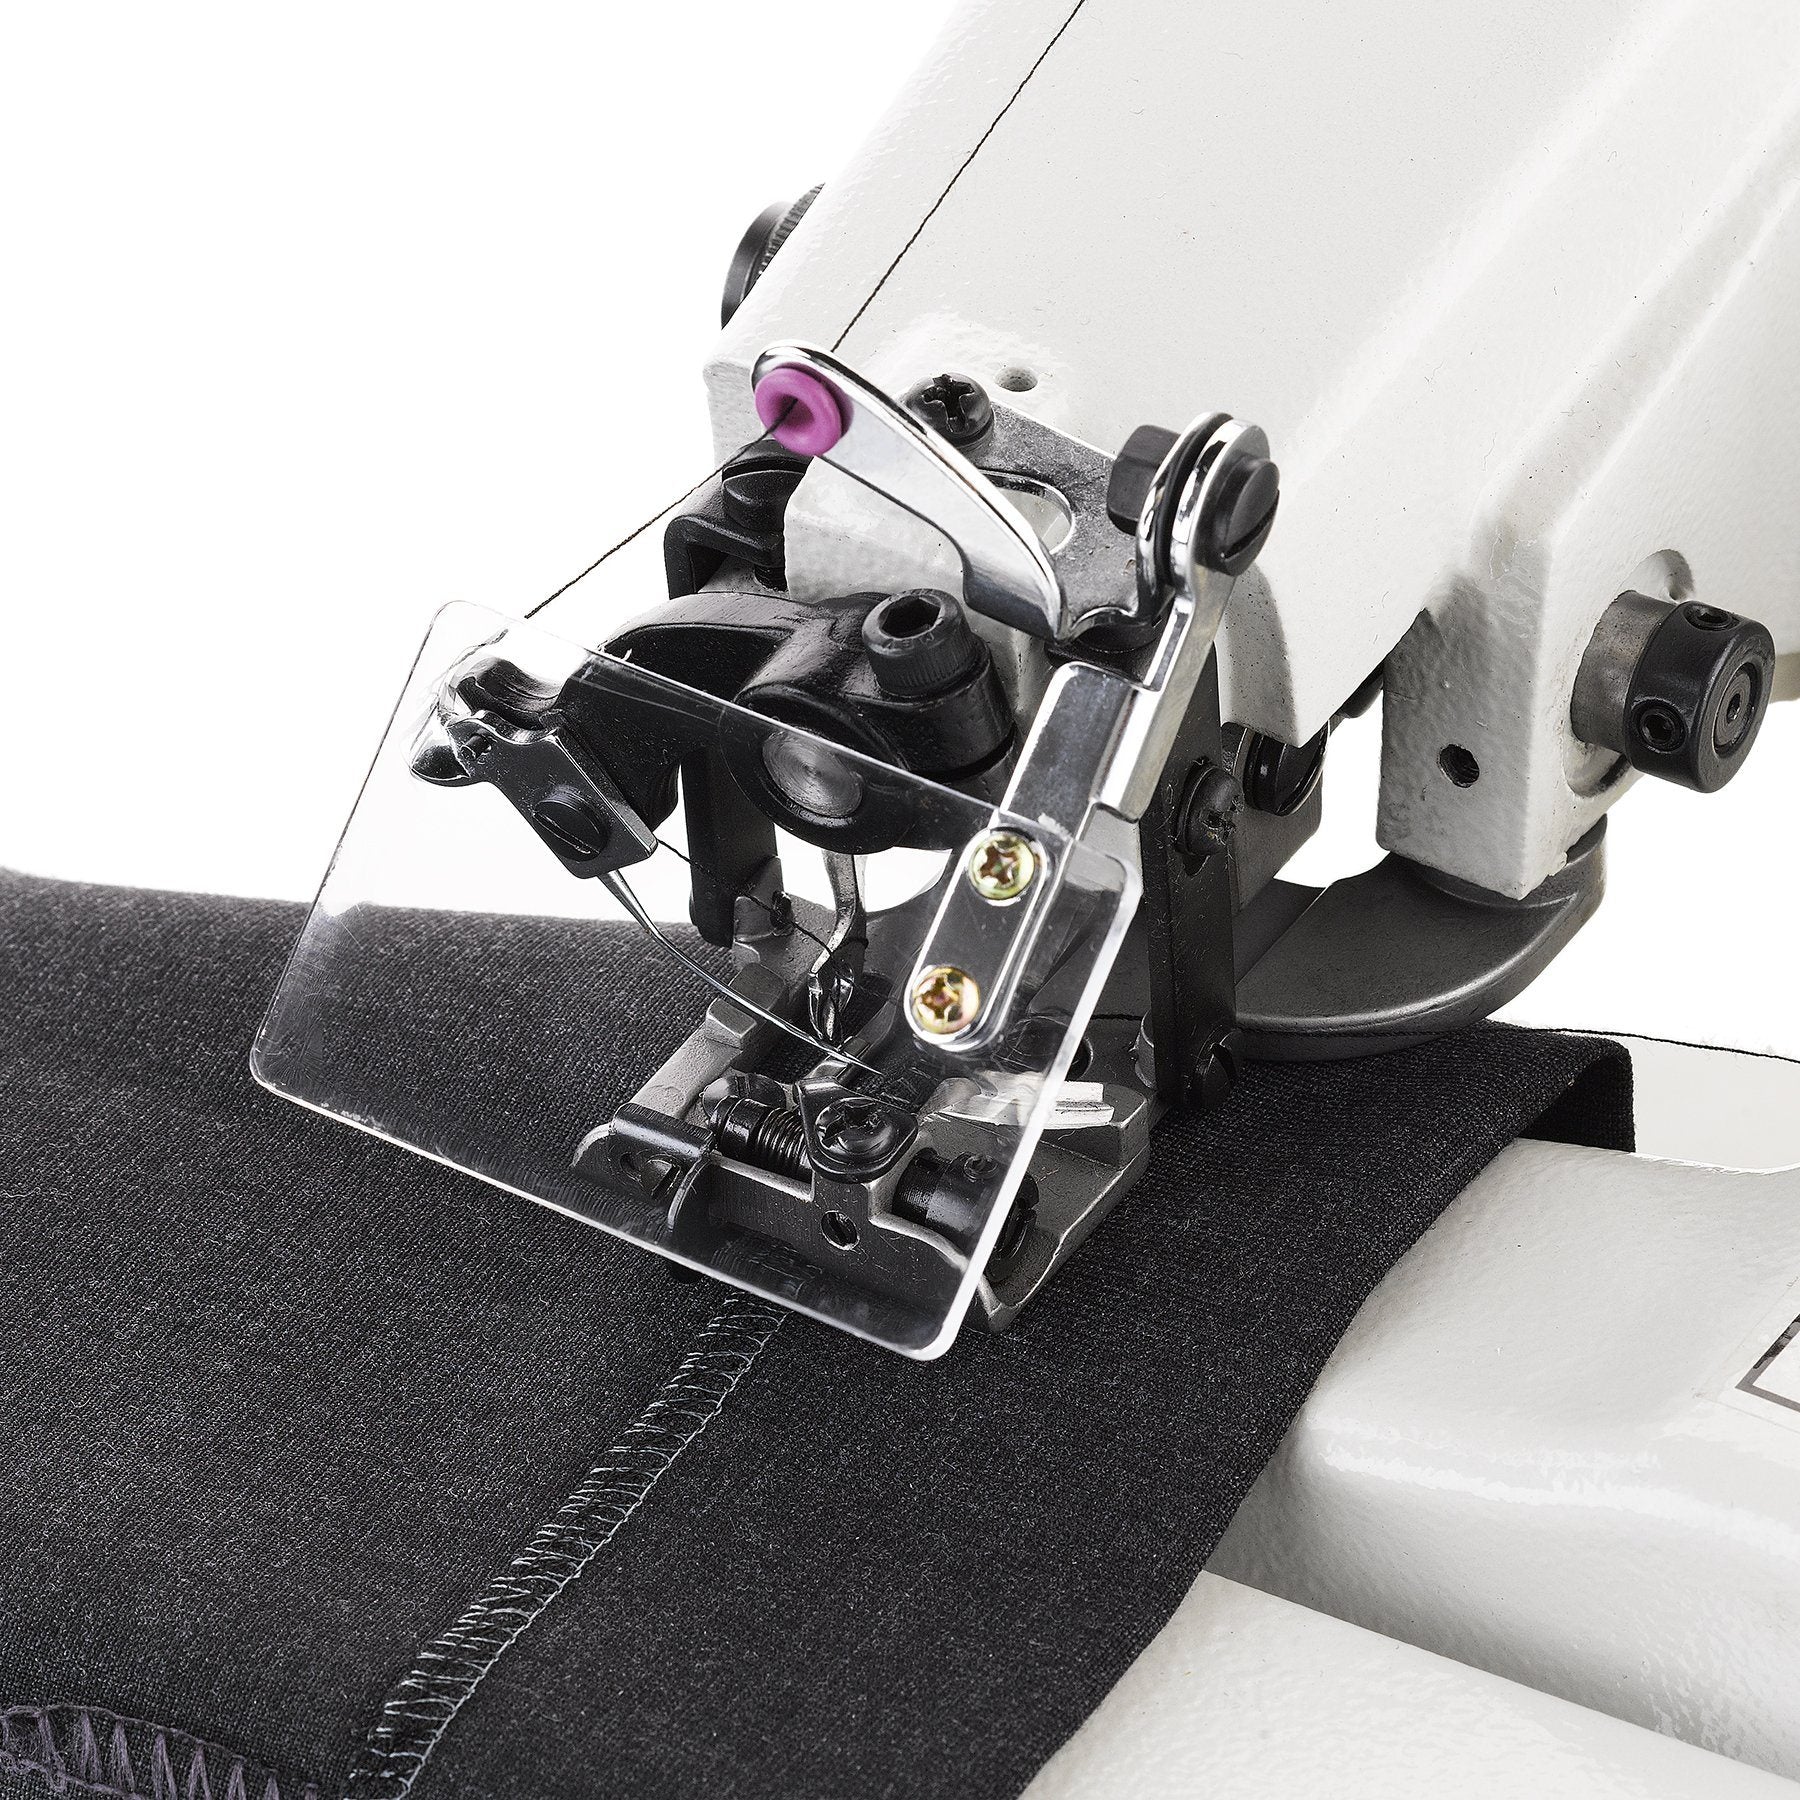 MAESTRO 600SB PORTABLE BLINDSTITCH SEWING MACHINE FOR HEMMING